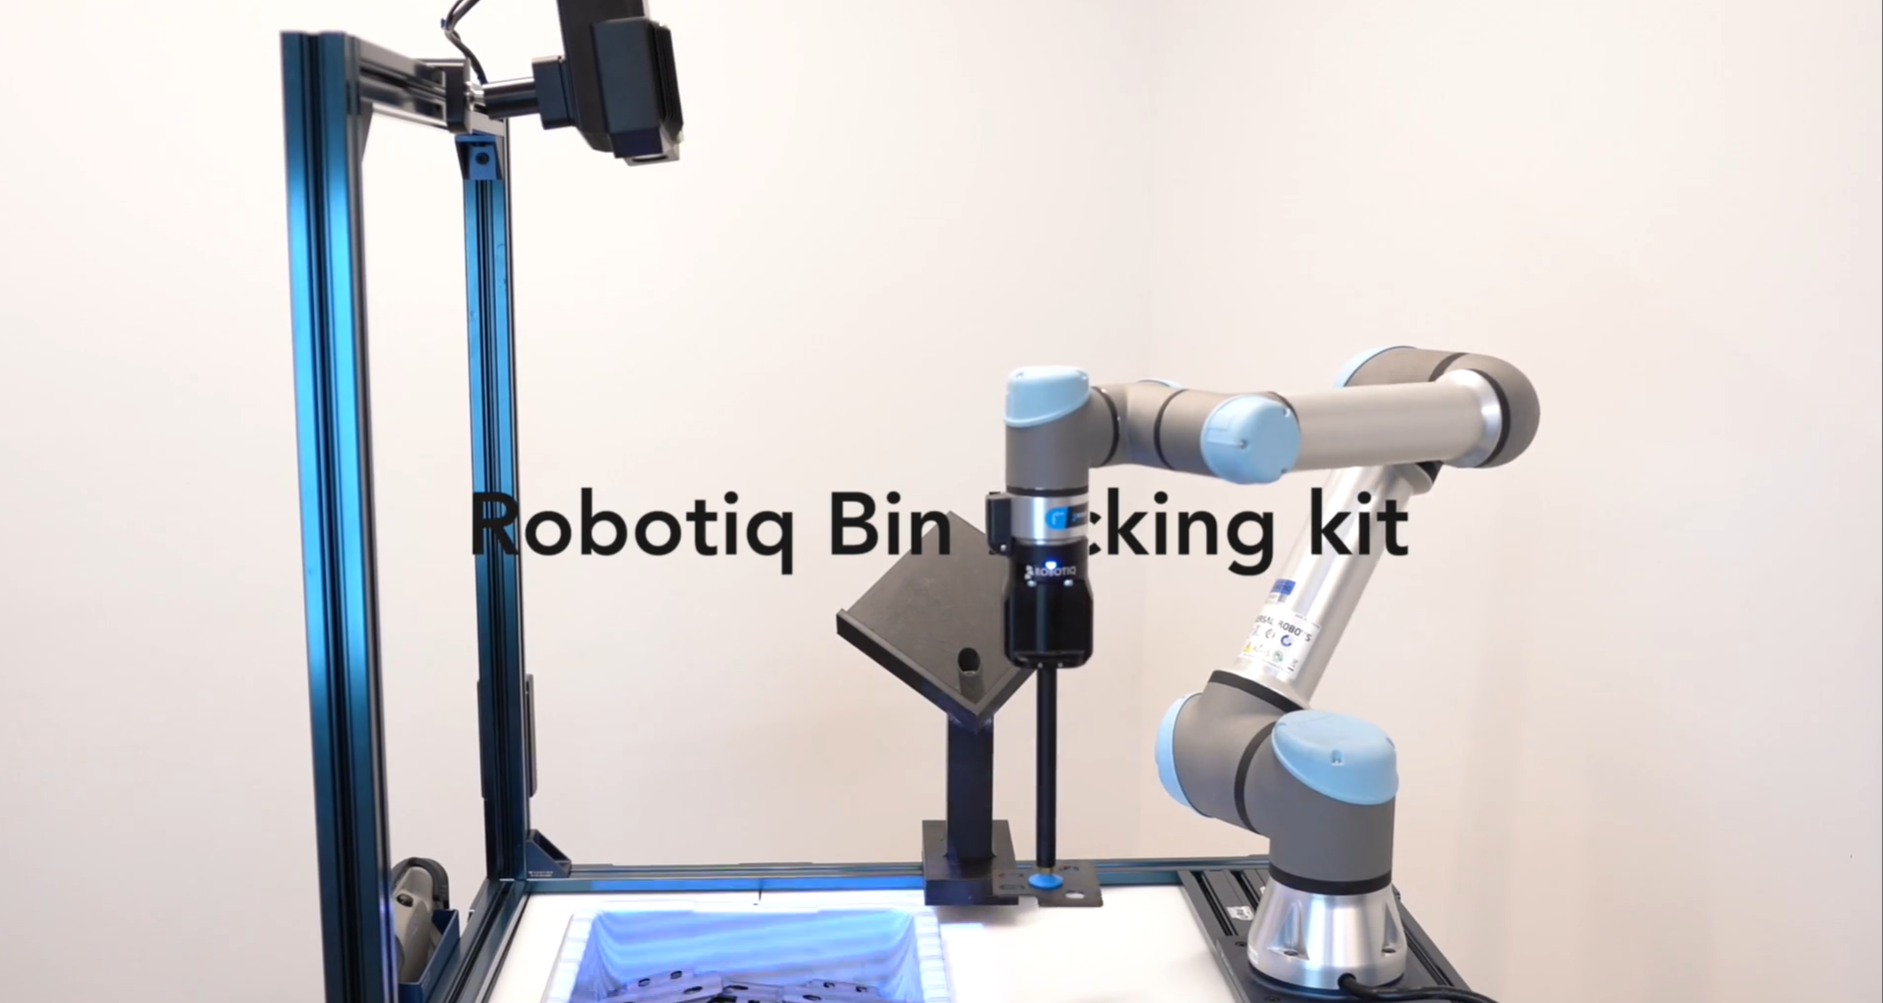 Robotiq + Pickit = industry collaboration that inspires